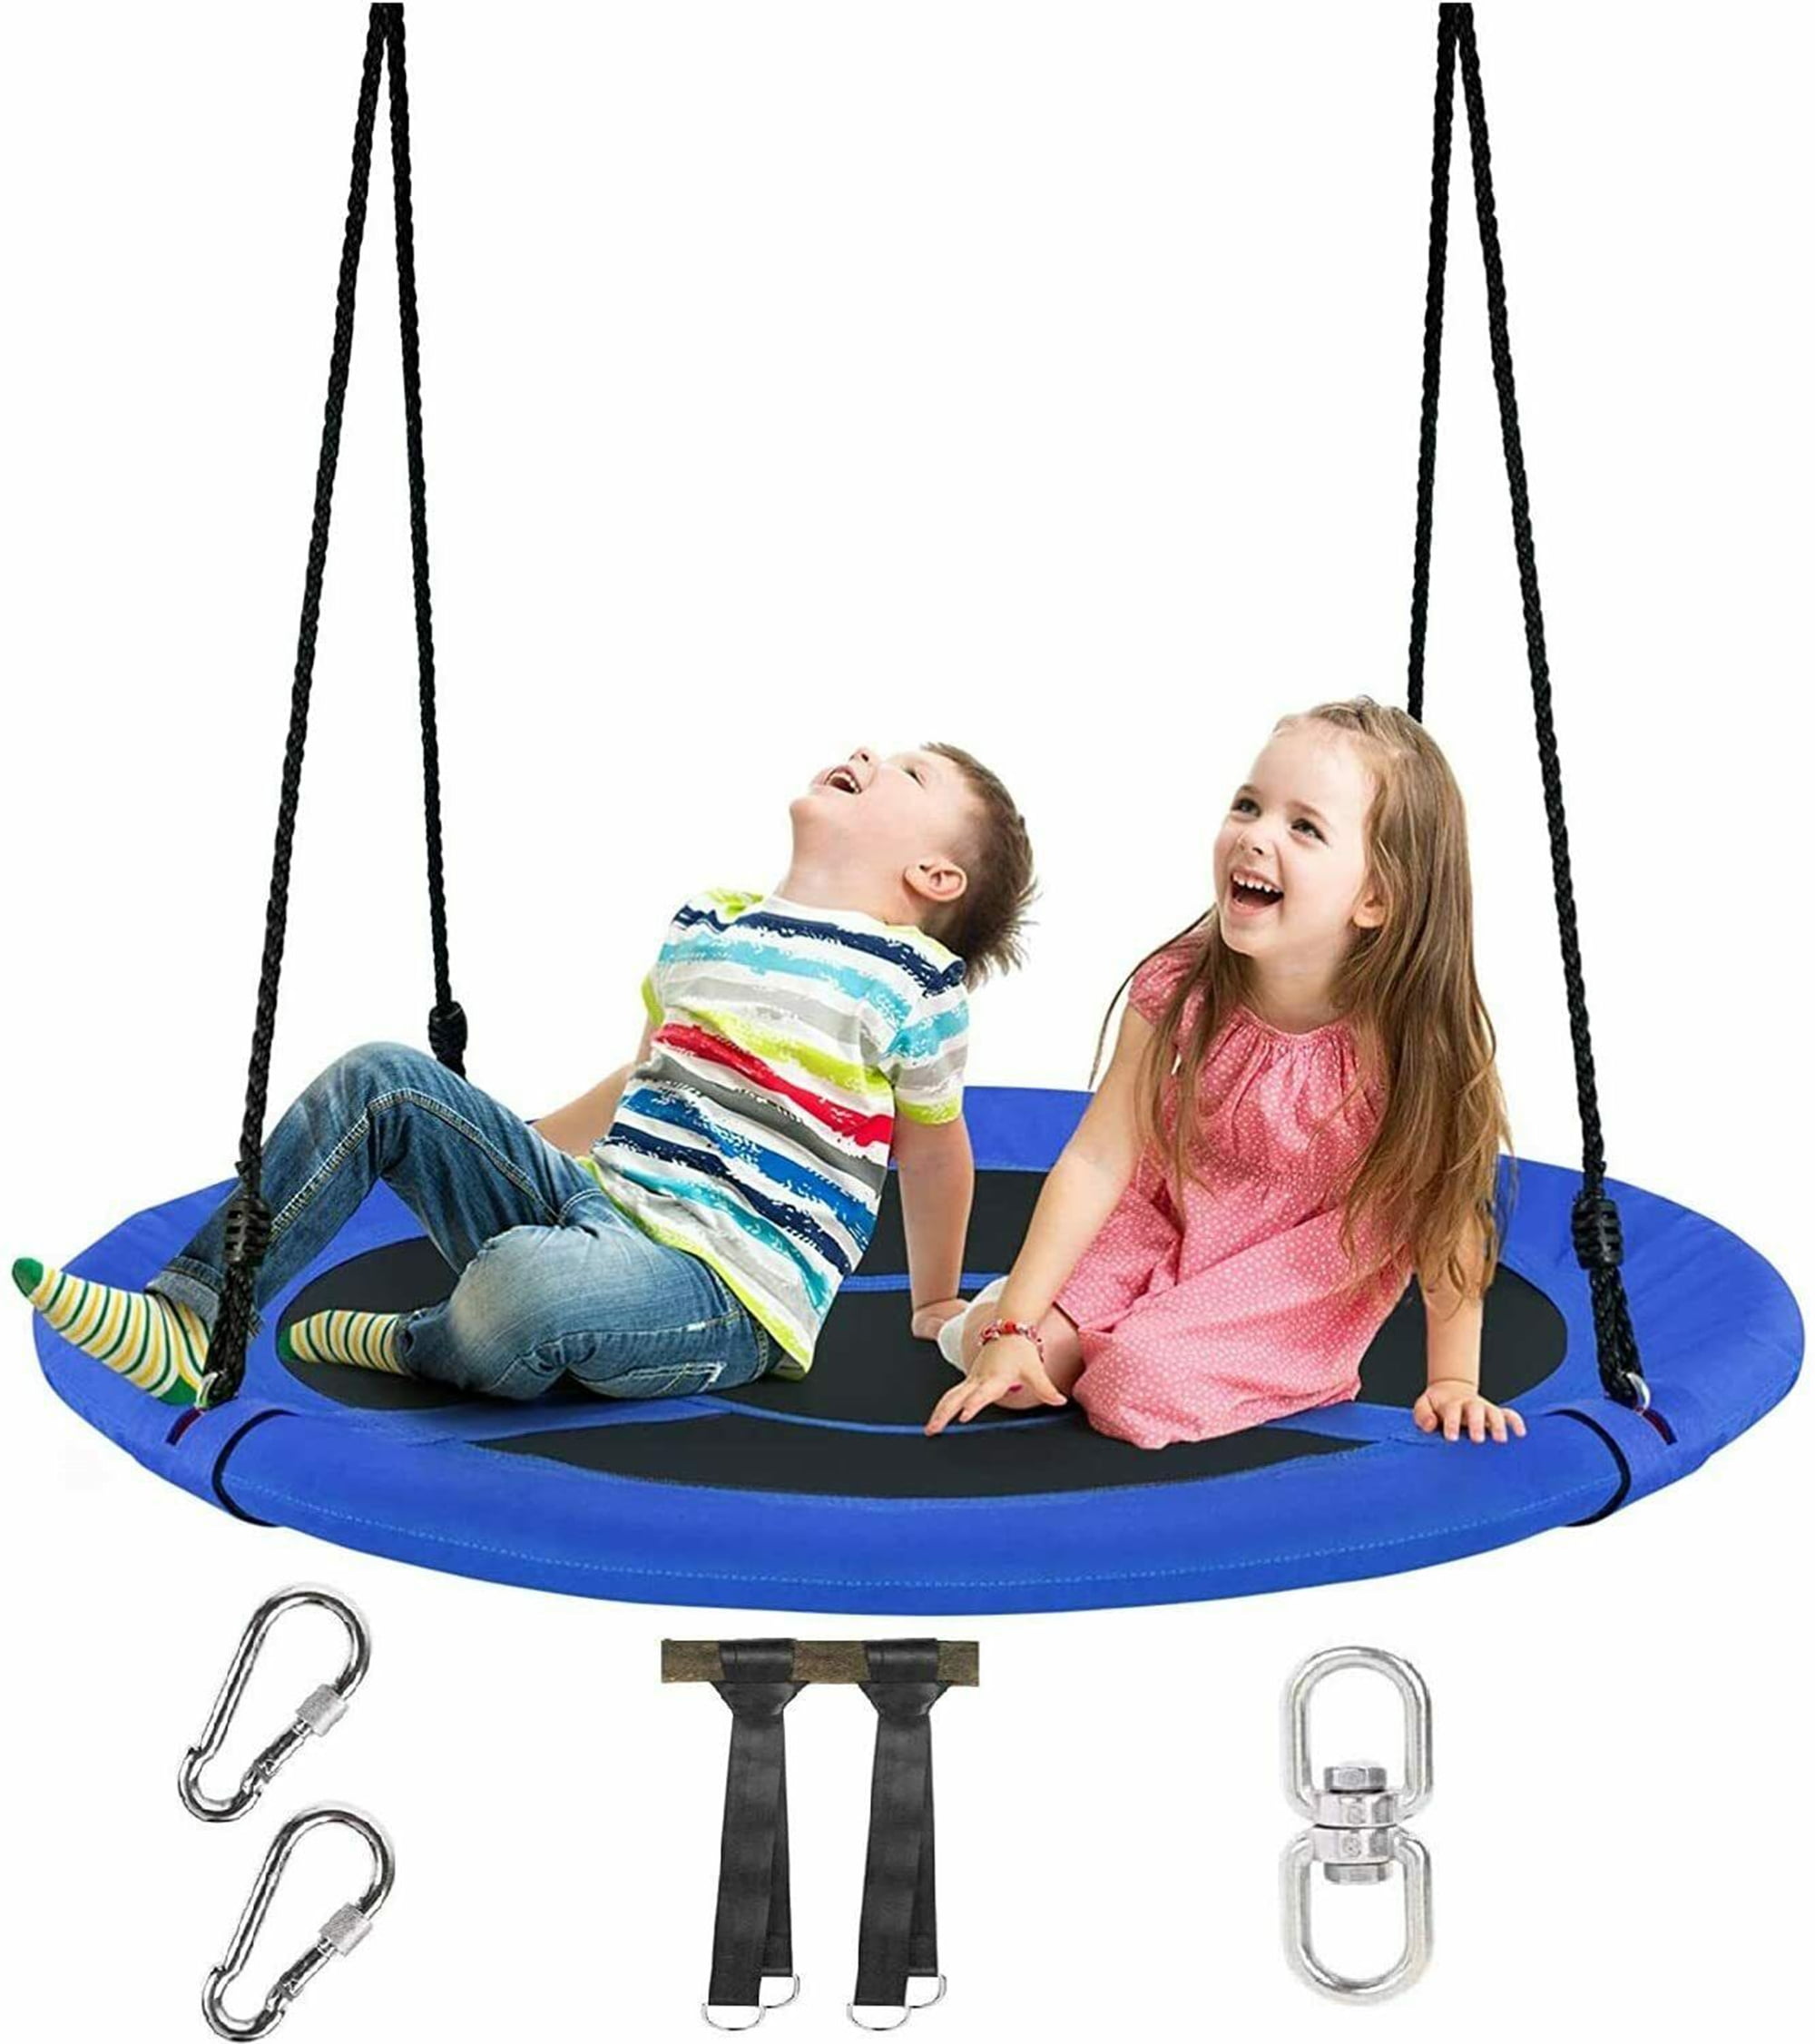 Outdoor Round Swing seat Take Me Away 40 Inch Flying Saucer Tree Swing with Straps Flags for Kids 